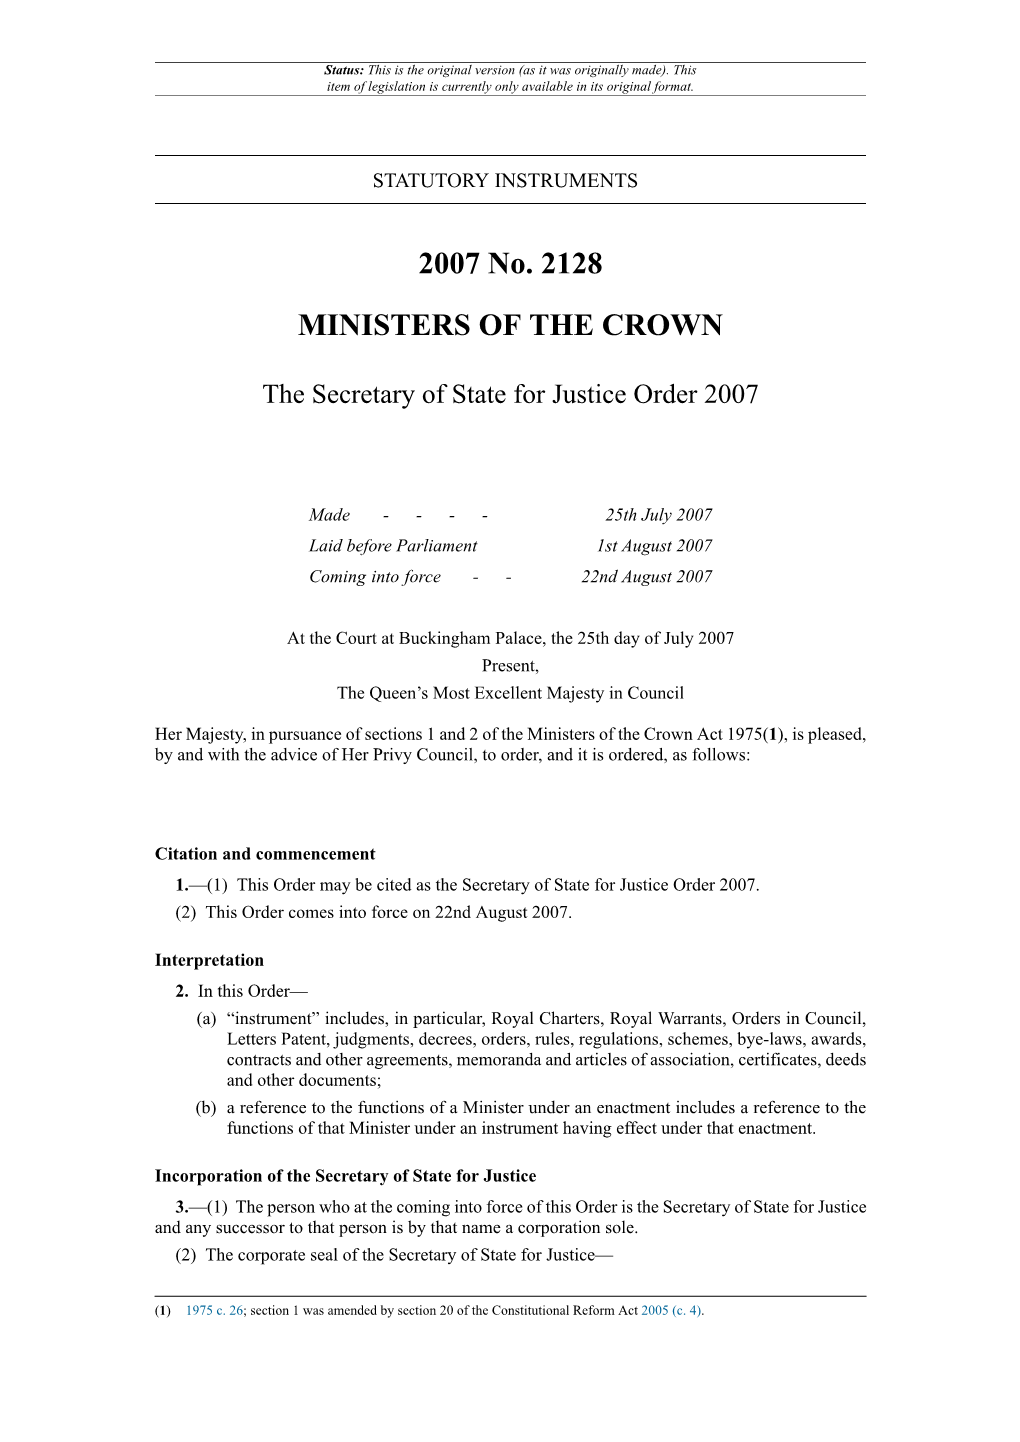 The Secretary of State for Justice Order 2007